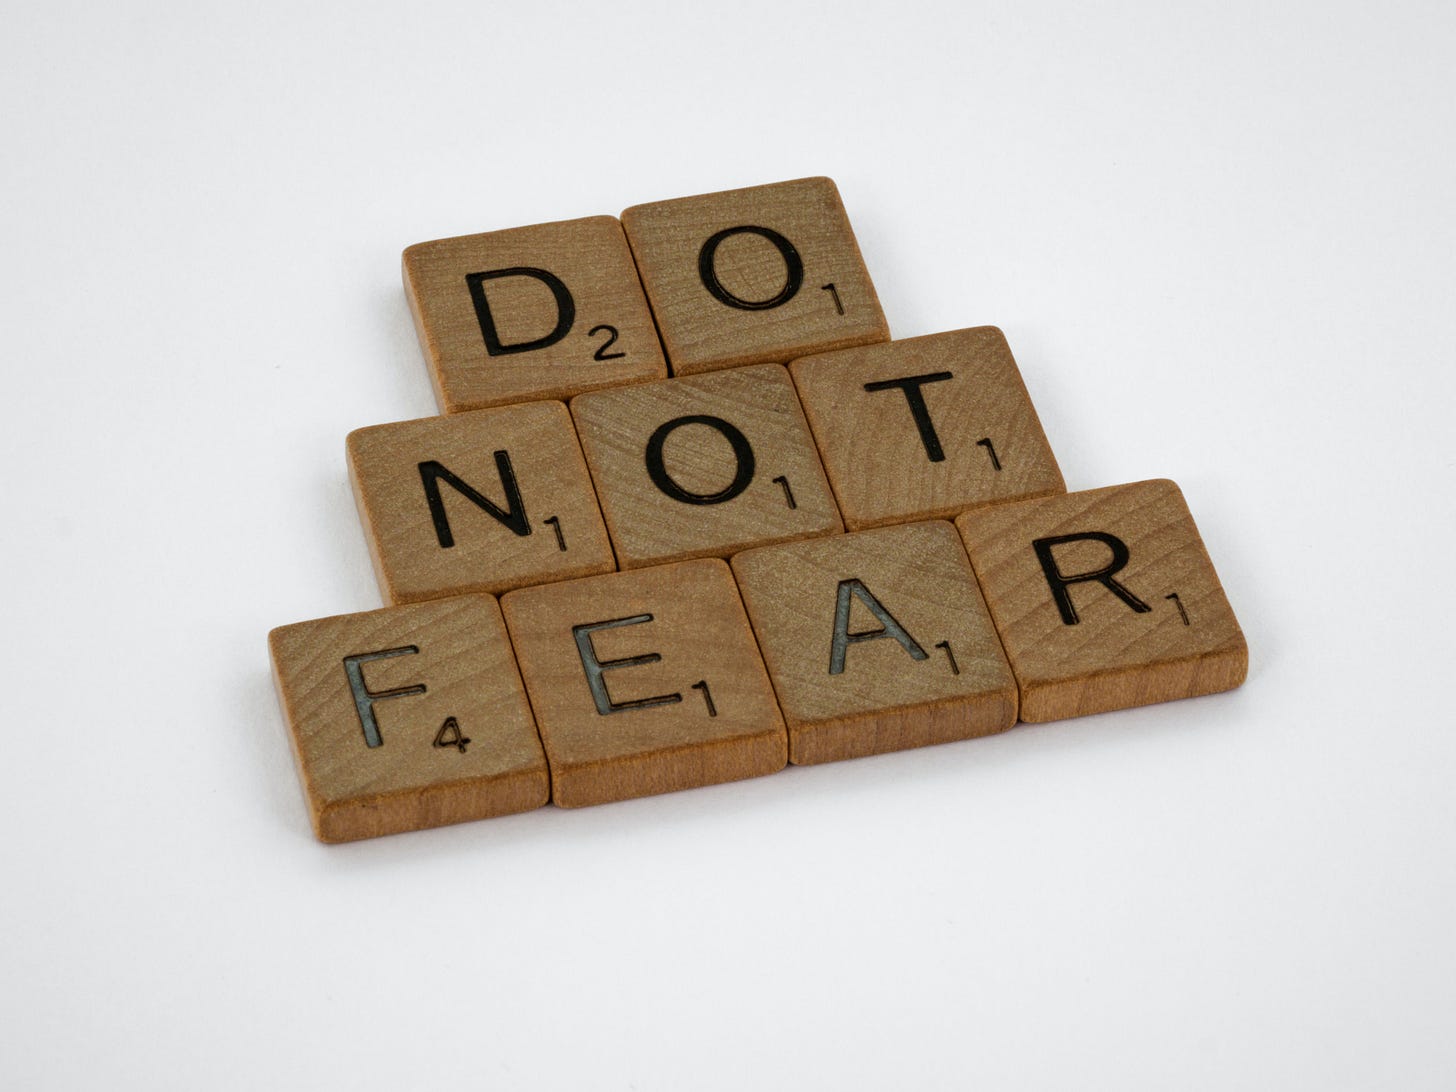 "Do not fear" written in Scrabble tiles set against a white background. "Do" is on the top row, "Not" in the middle row, and "Fear" is on the bottom row.